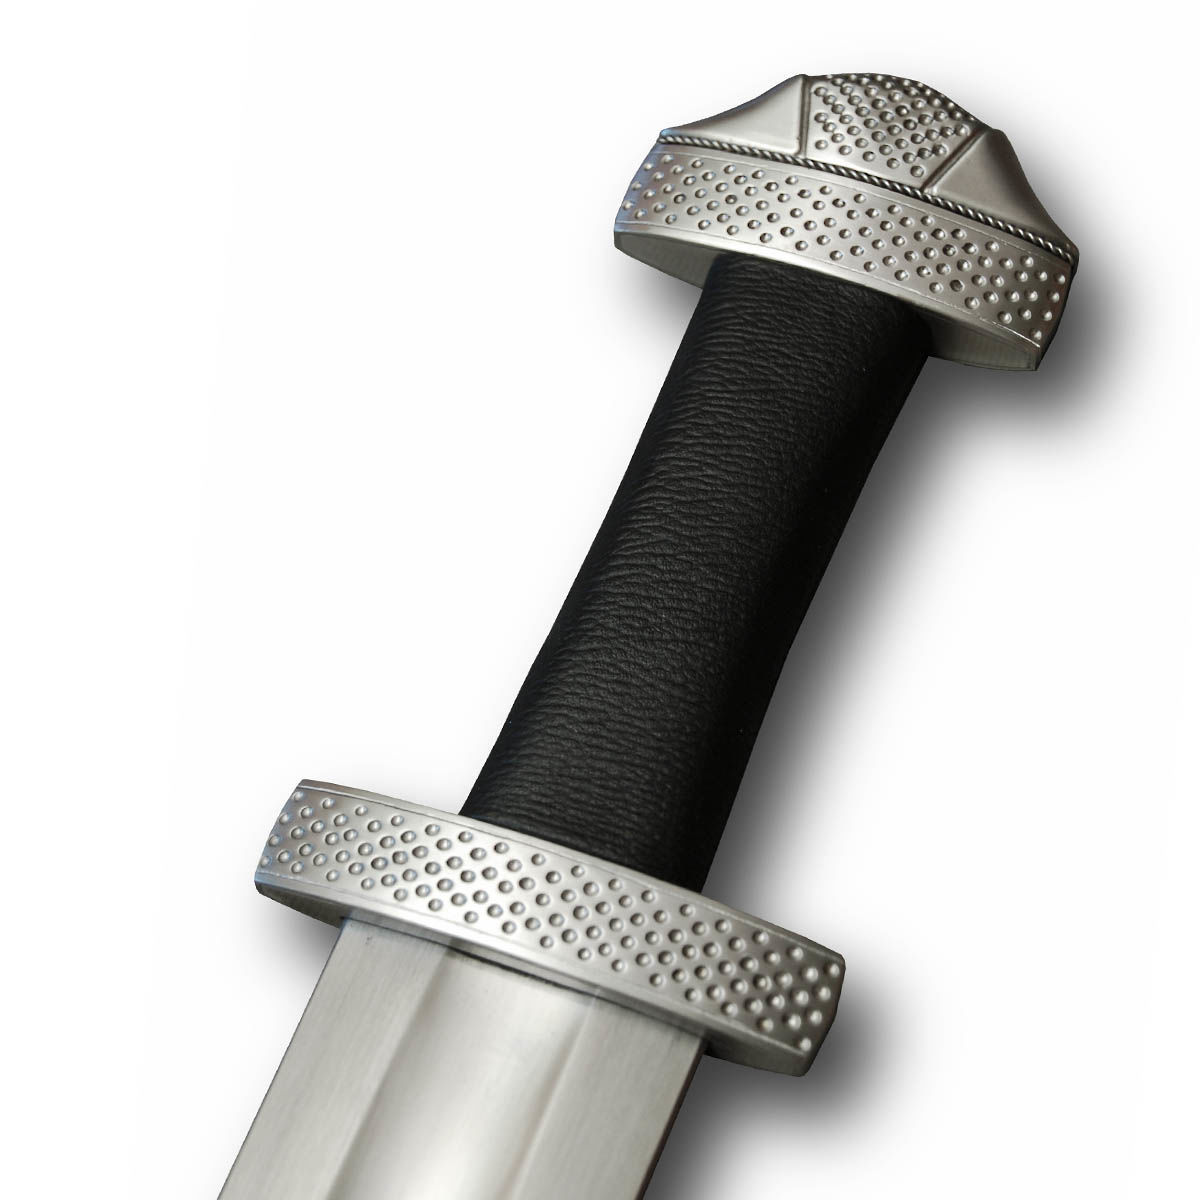 Hanwei / Tinker Sharp 9th Century Viking Sword with circular indentation hilt decoration and carbon steel blade